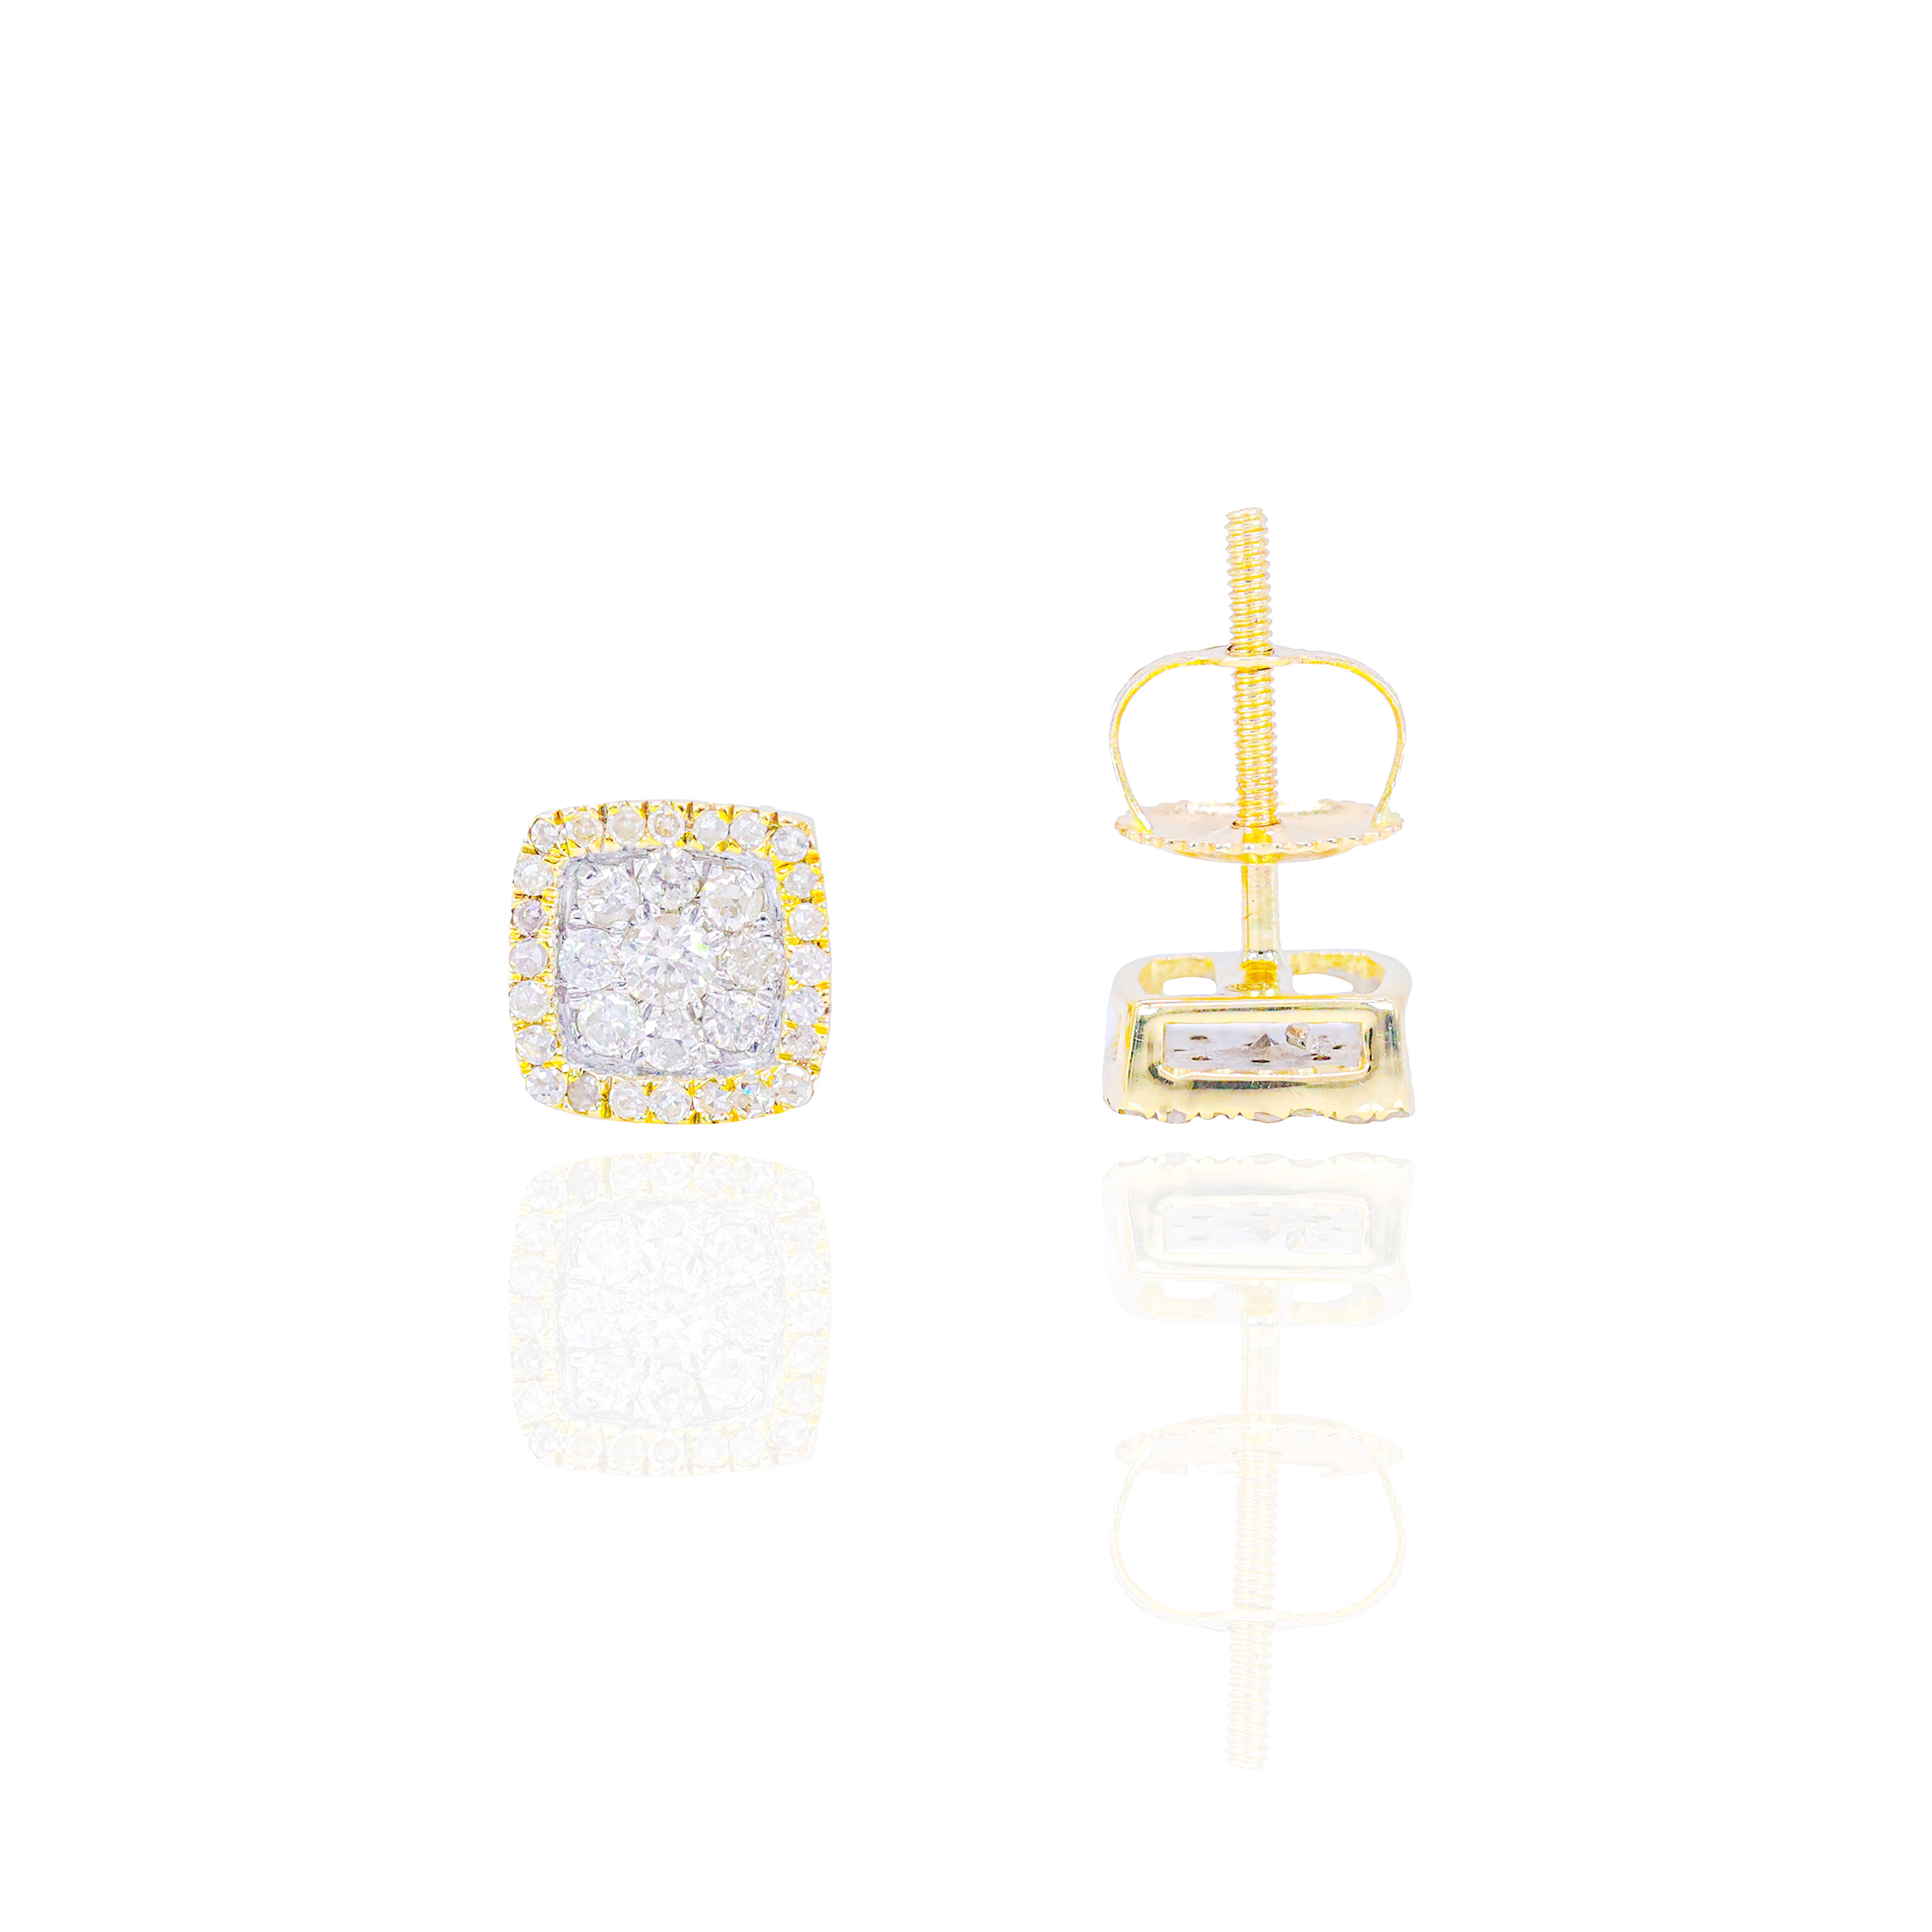 Two-Tone Square Diamond Cluster Earrings